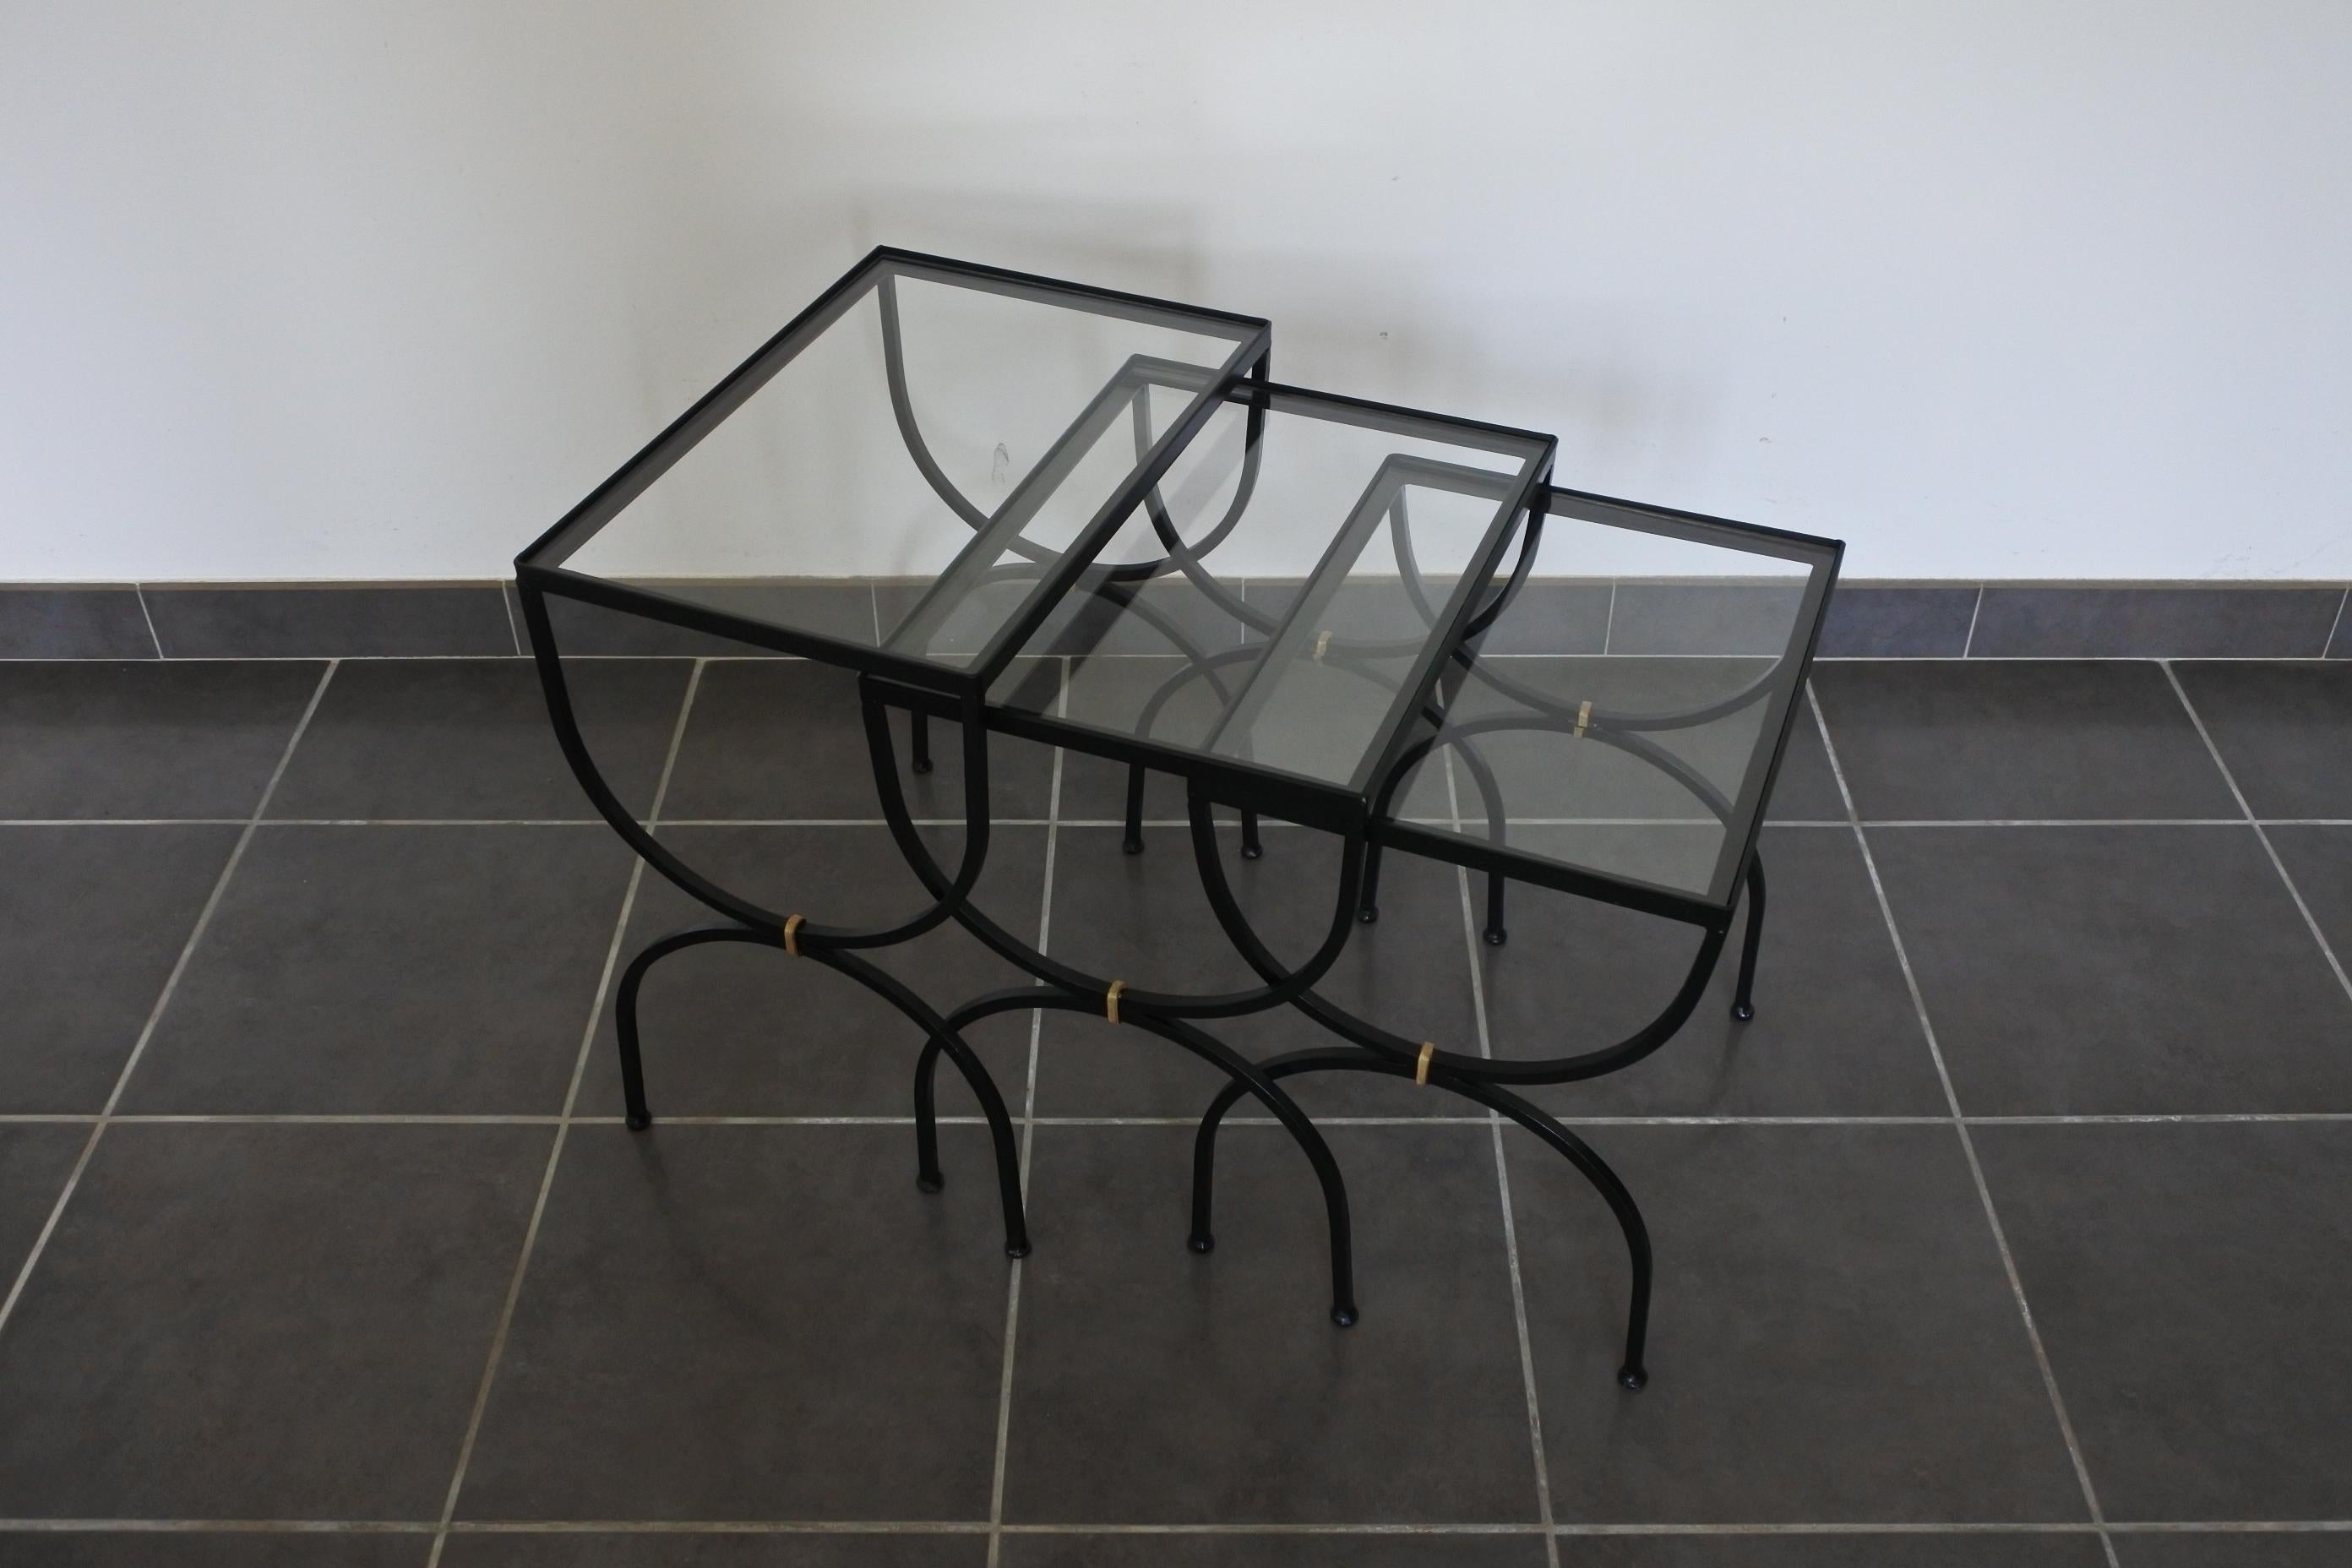 Set of nesting or side tables.
Black lacquered metal with clear glass tops.
Made in France in the 1950s.

Measurements: 
Large D 32 cm, W 46 cm, H 47.5 cm
Medium D 32 cm, W 41 cm, H 44 cm
Small D 32 cm, W 37.5 cm, H 41.5 cm.